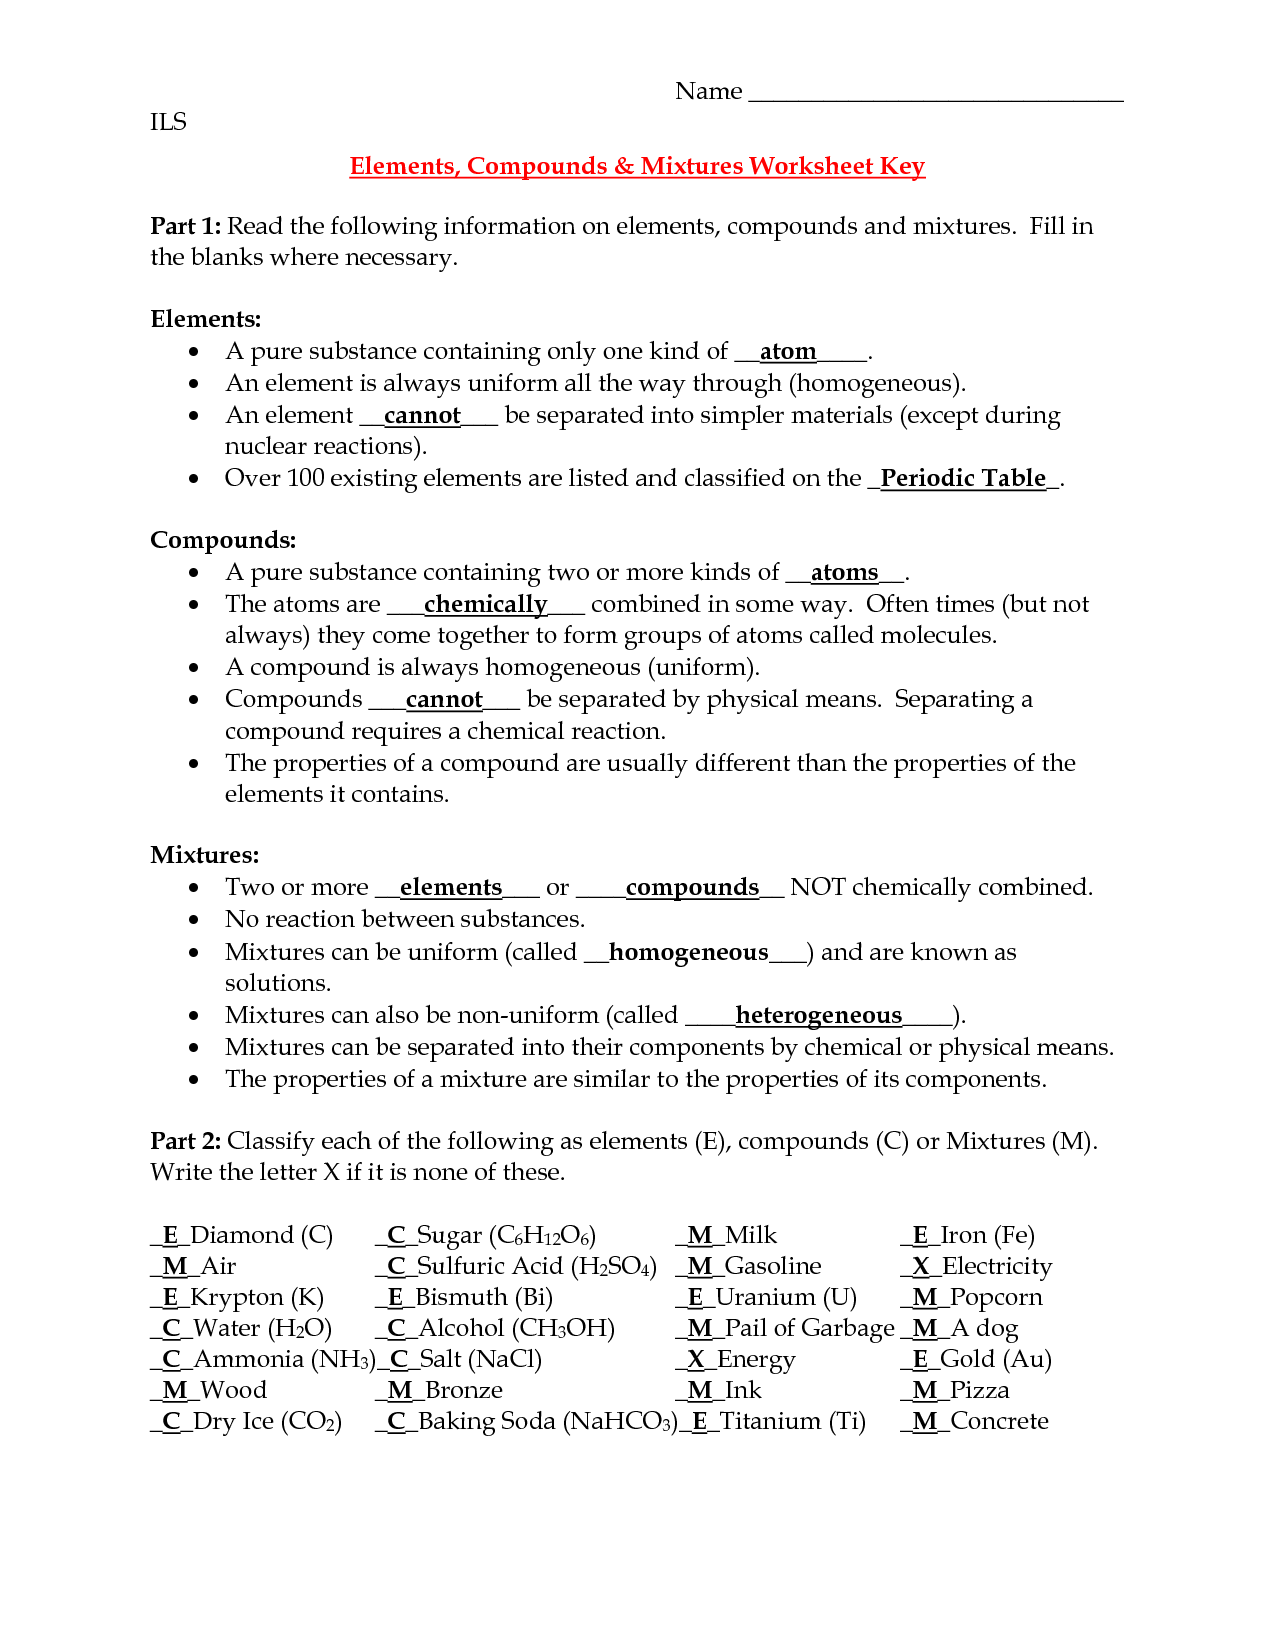 elements-compounds-and-mixtures-worksheet-answer-key-part-2